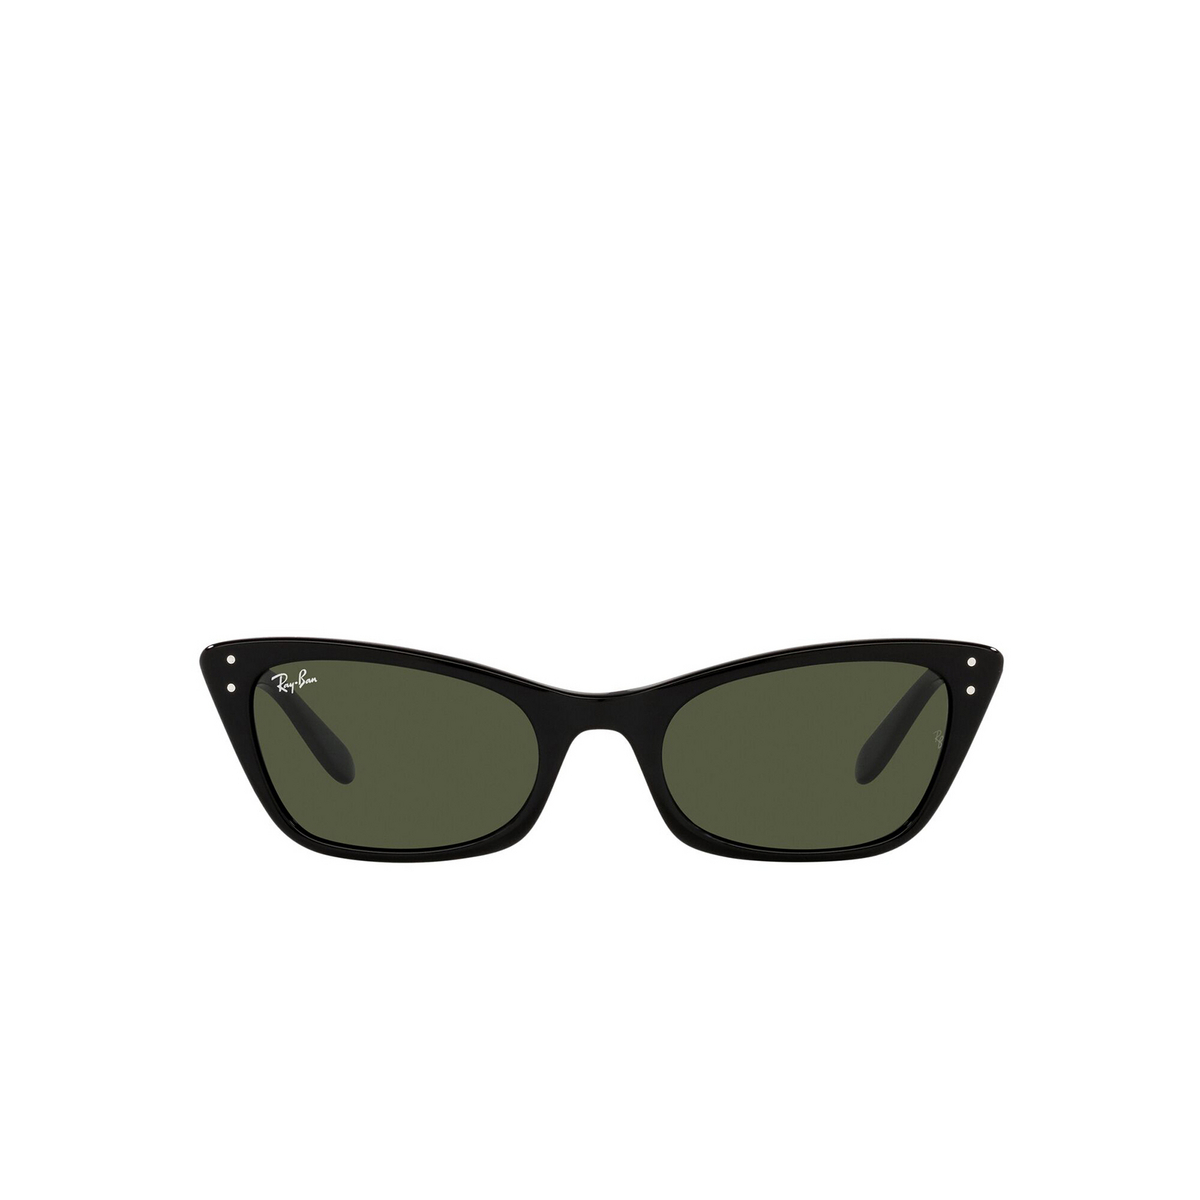 Ray-Ban® Cat-eye Sunglasses: Lady Burbank RB2299 color Black 901/31 - front view.